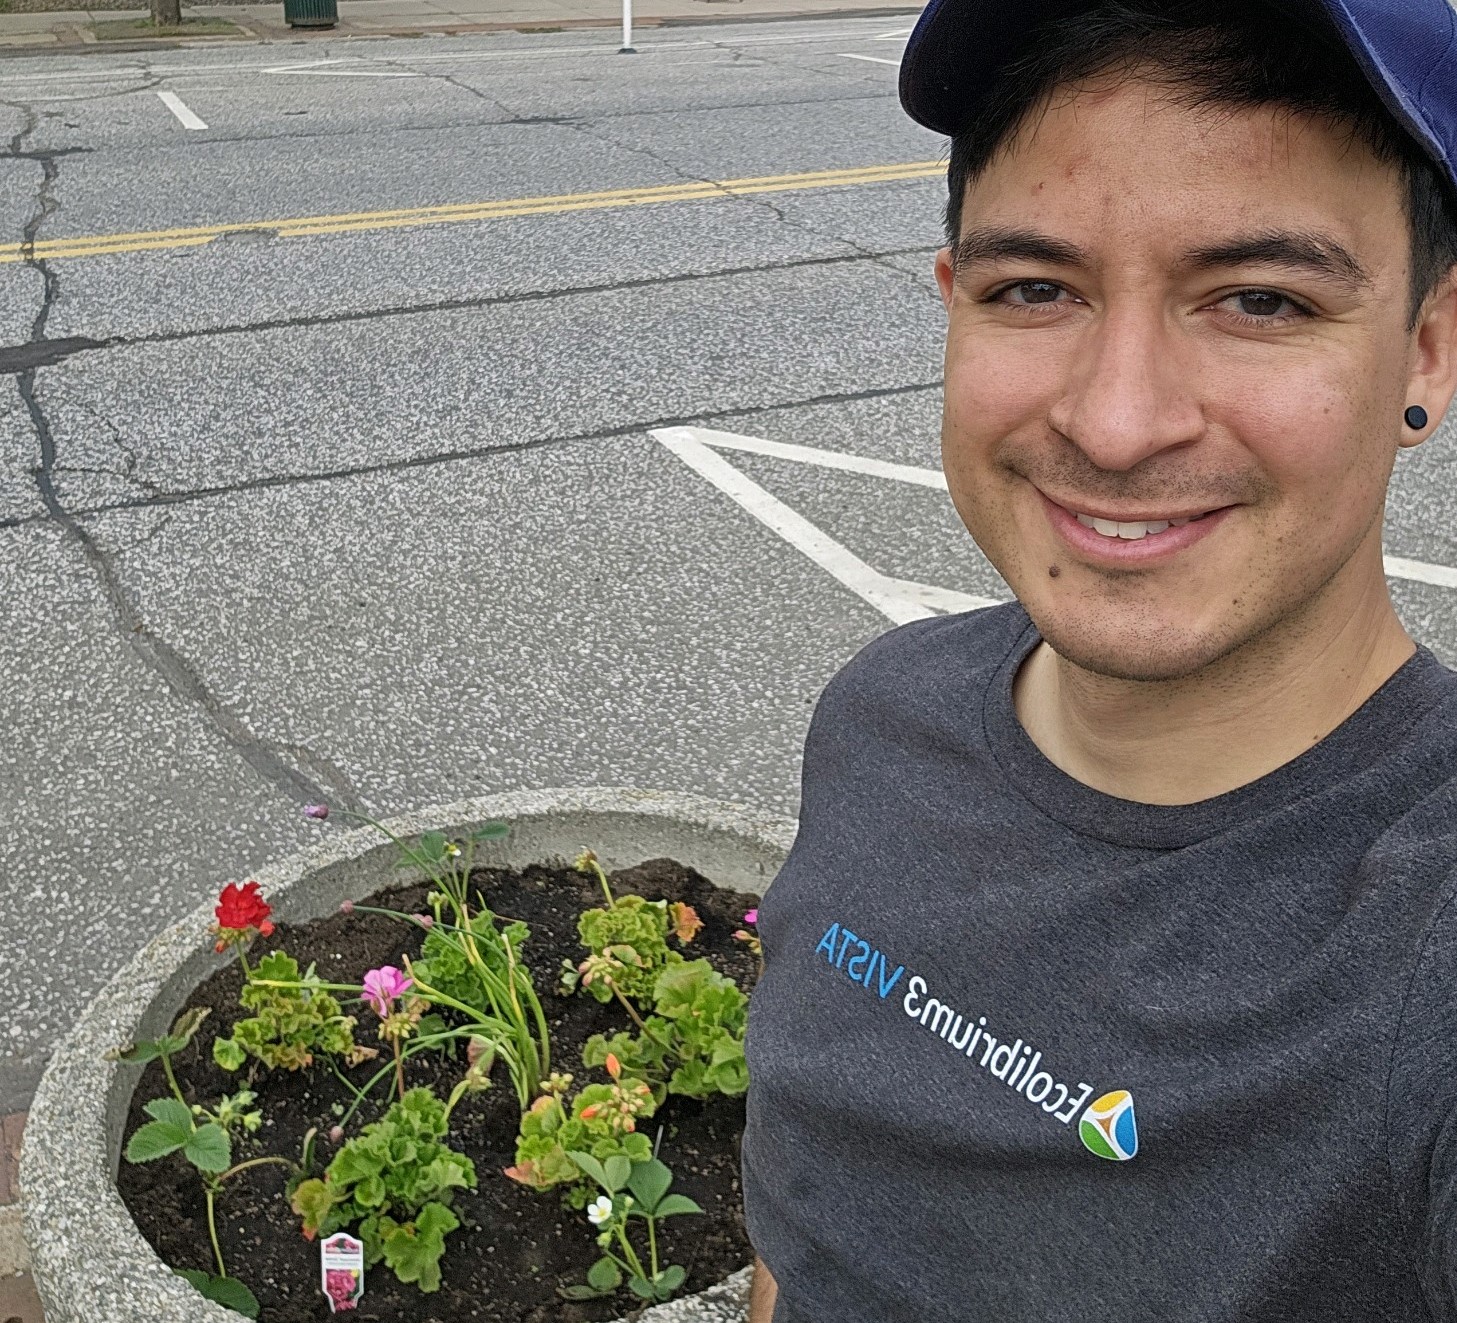 Smiling person poses by planter